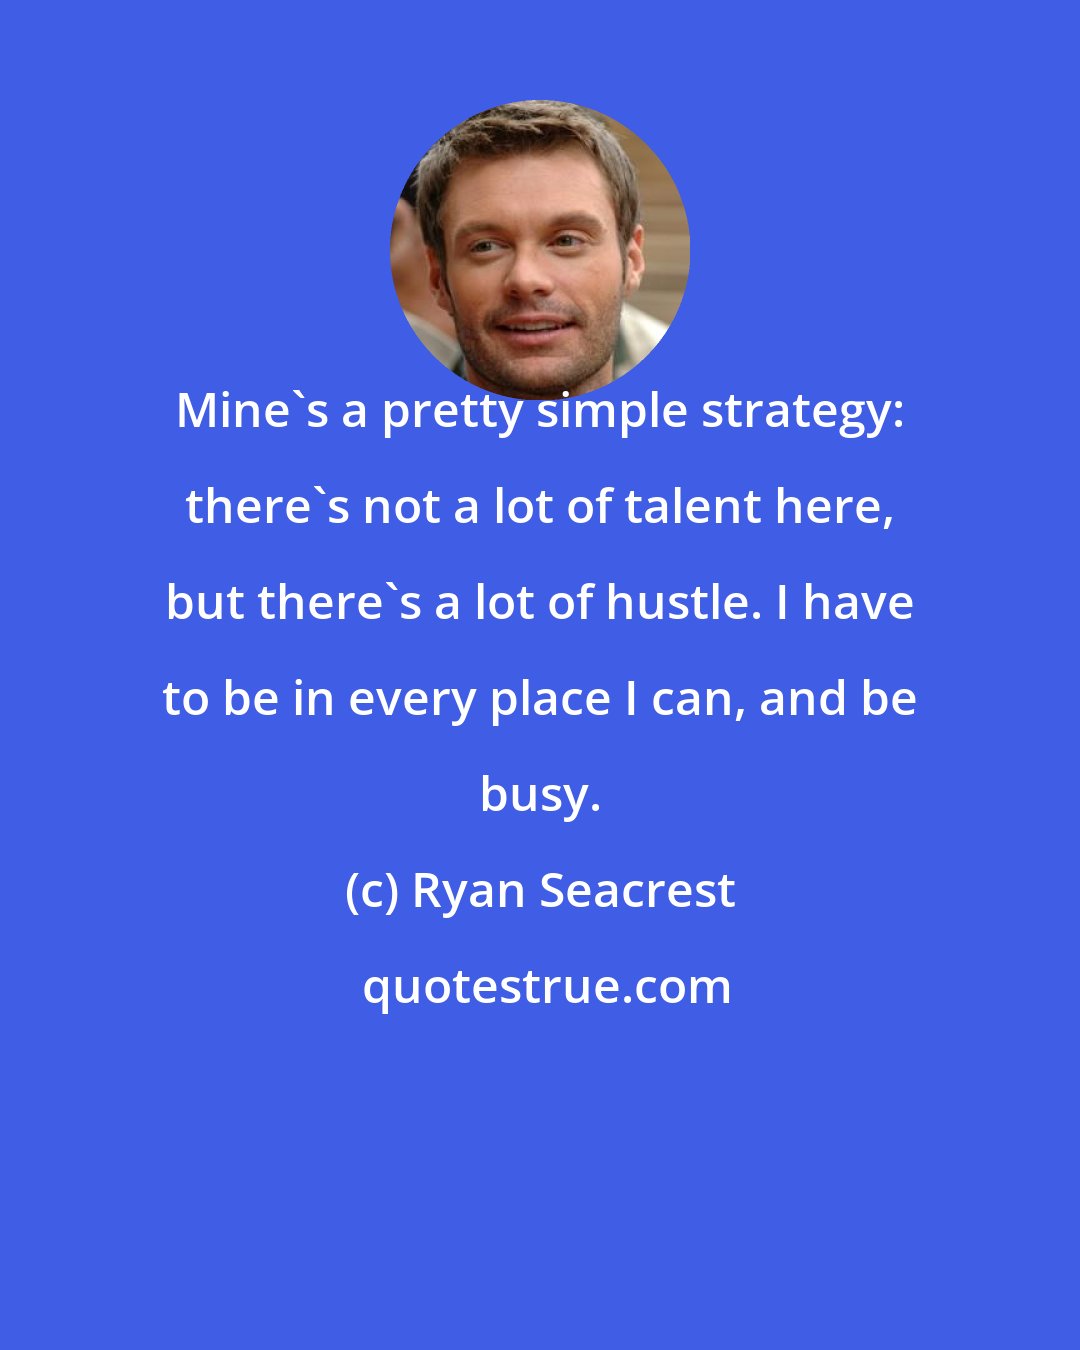 Ryan Seacrest: Mine's a pretty simple strategy: there's not a lot of talent here, but there's a lot of hustle. I have to be in every place I can, and be busy.